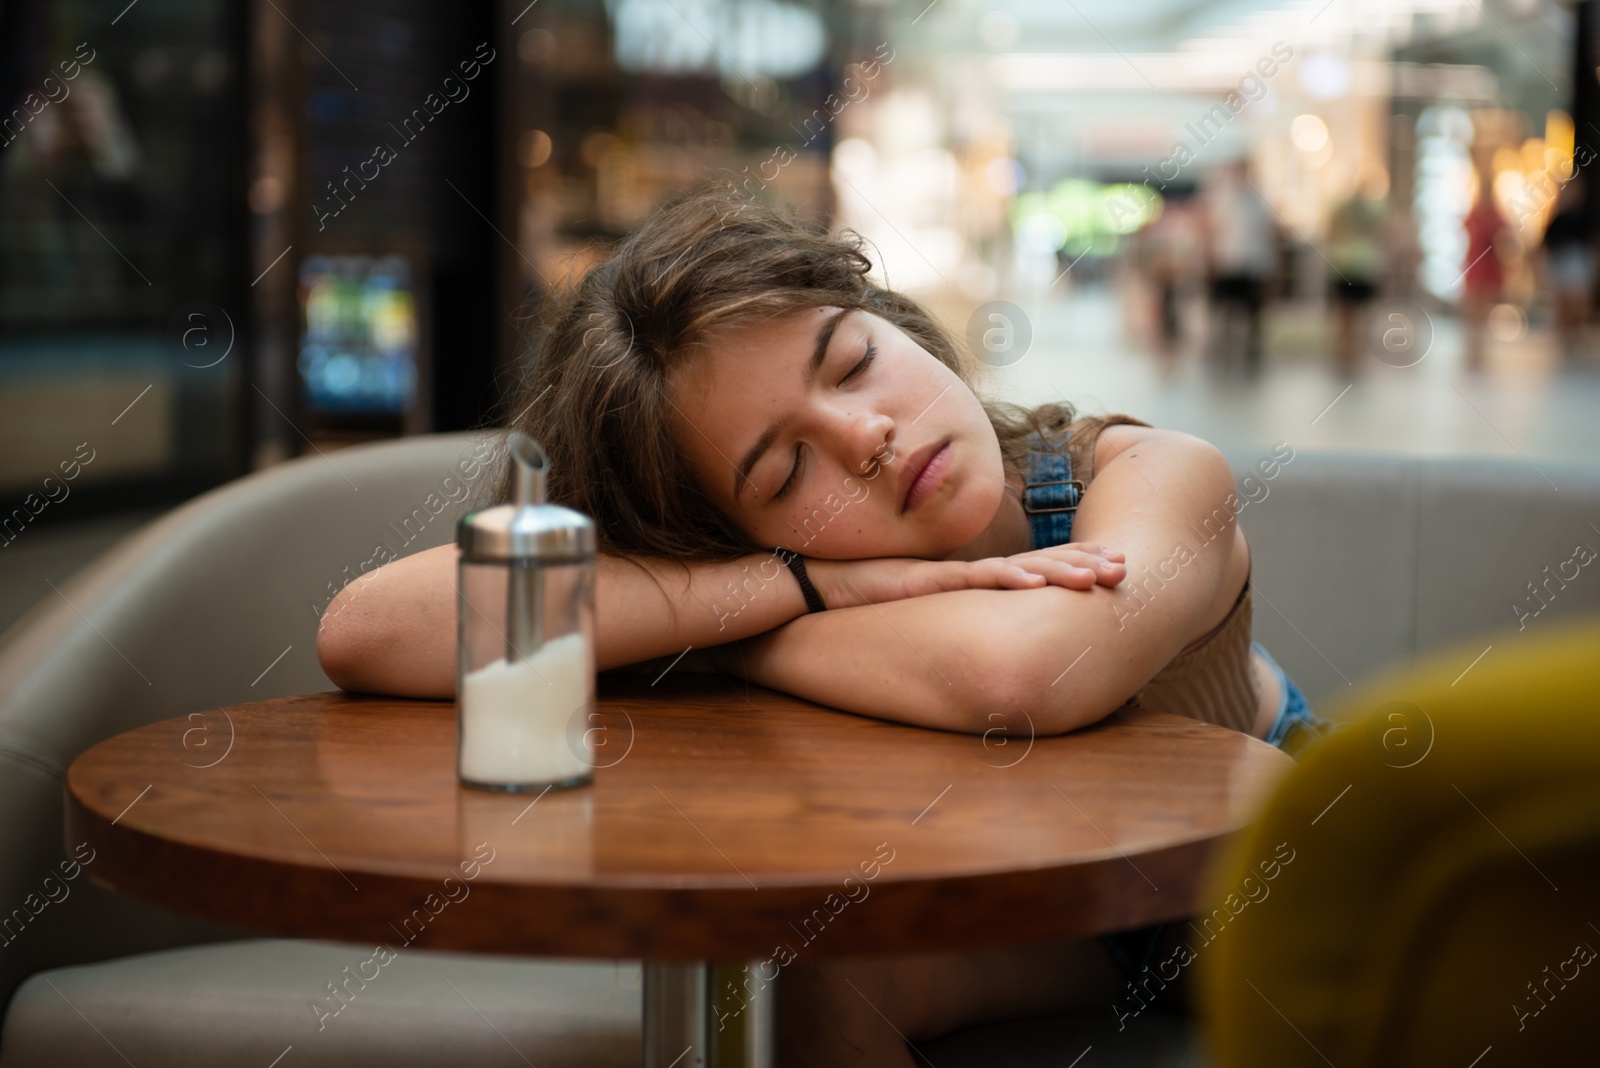 Photo of Tired teenage girl sleeping on wooden table in cafe